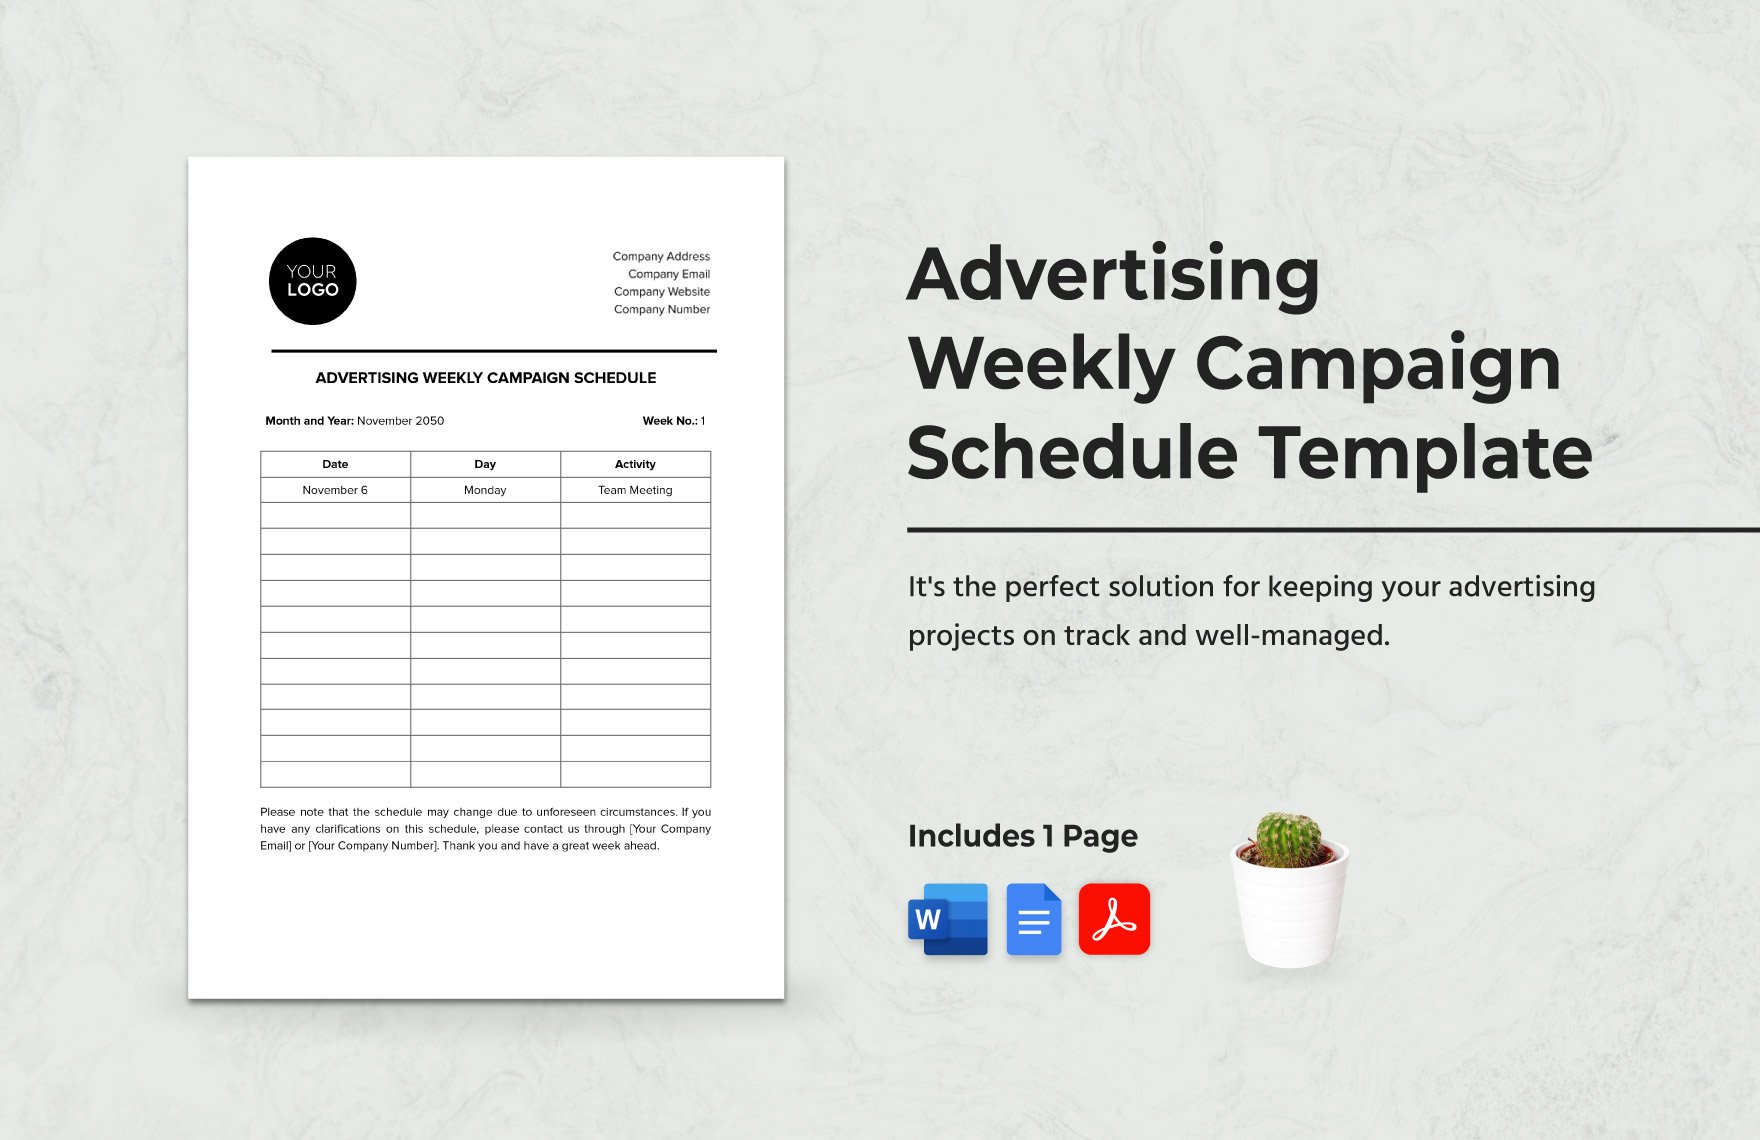 Advertising Weekly Campaign Schedule Template in Word, Google Docs, PDF